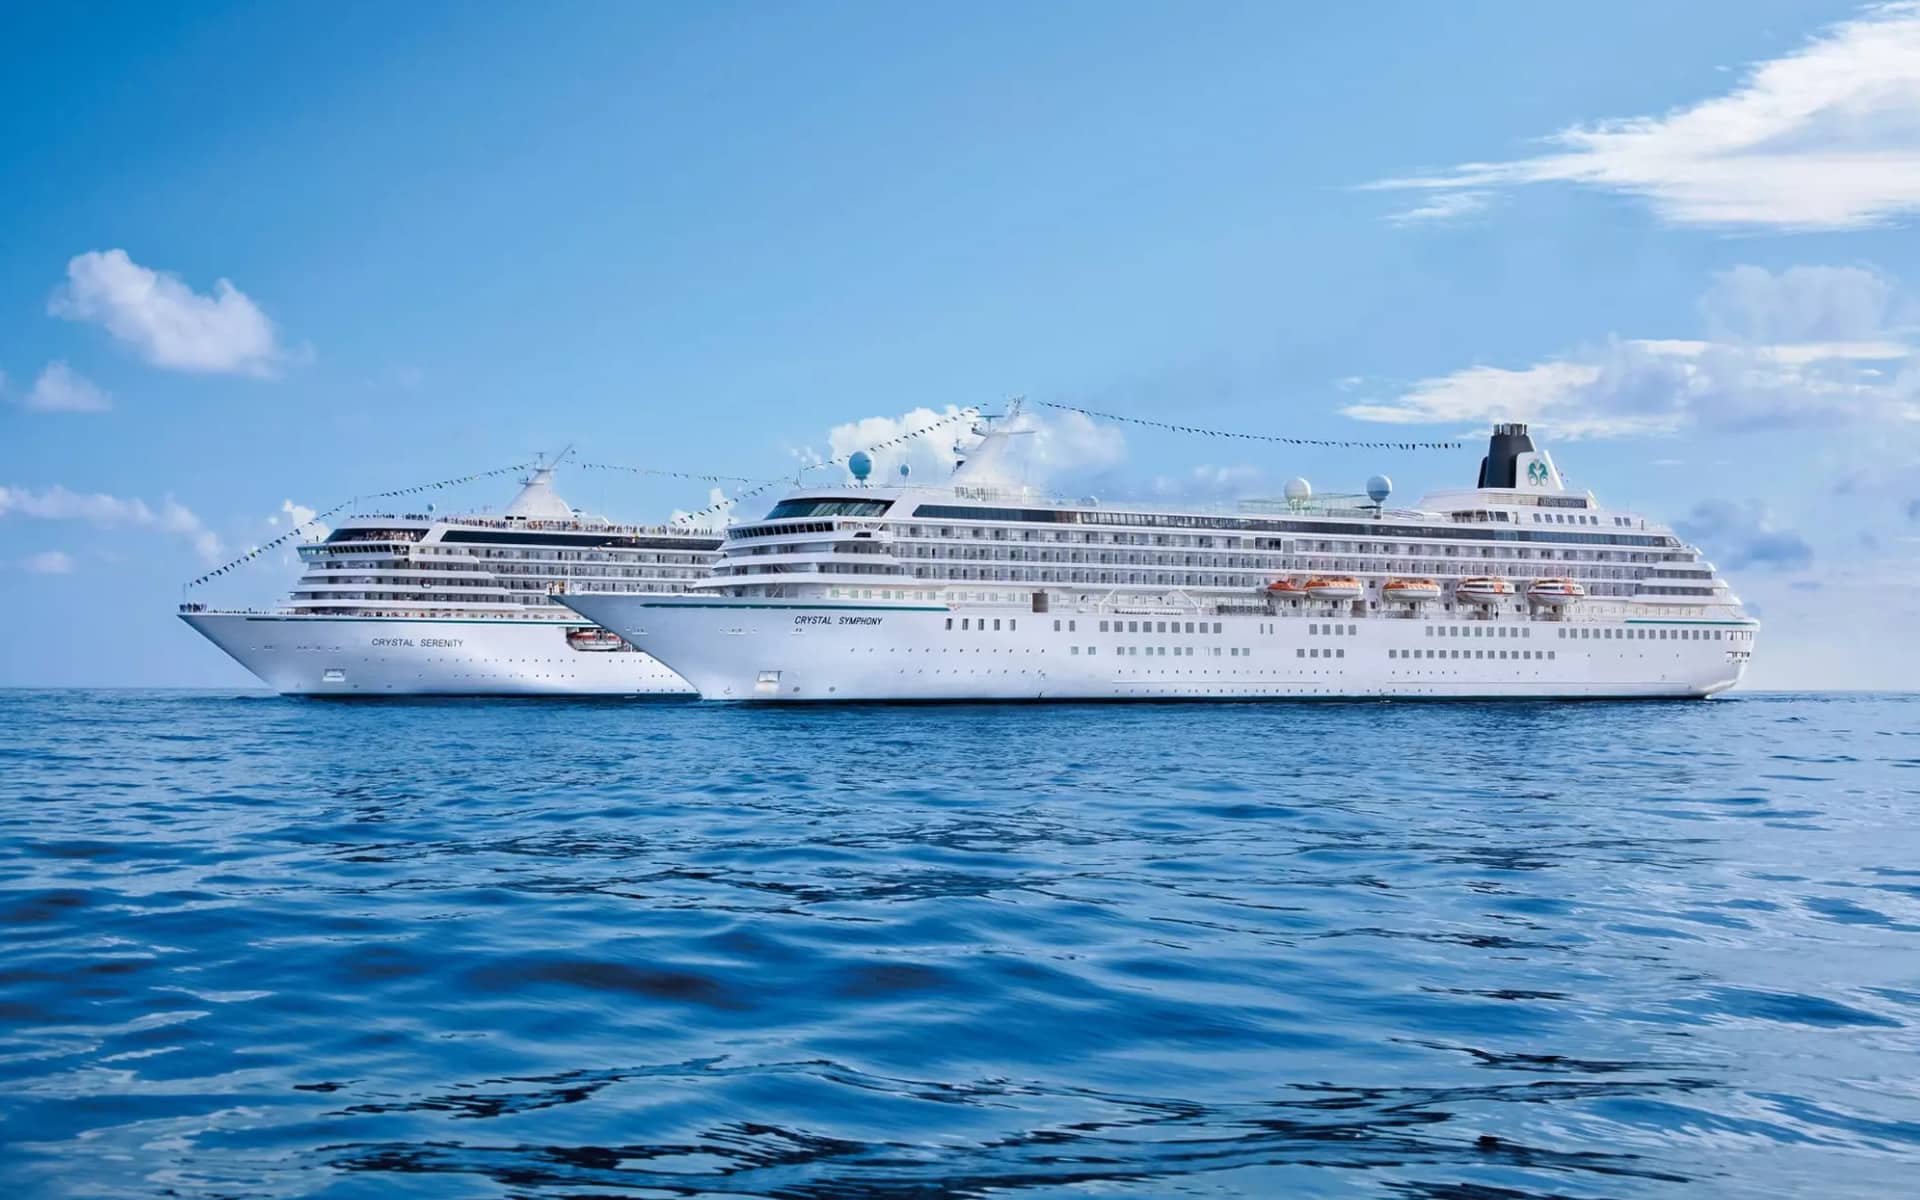 Crystal Cruises Open Deposits program launched with Crystal Serenity and Crystal Symphony.